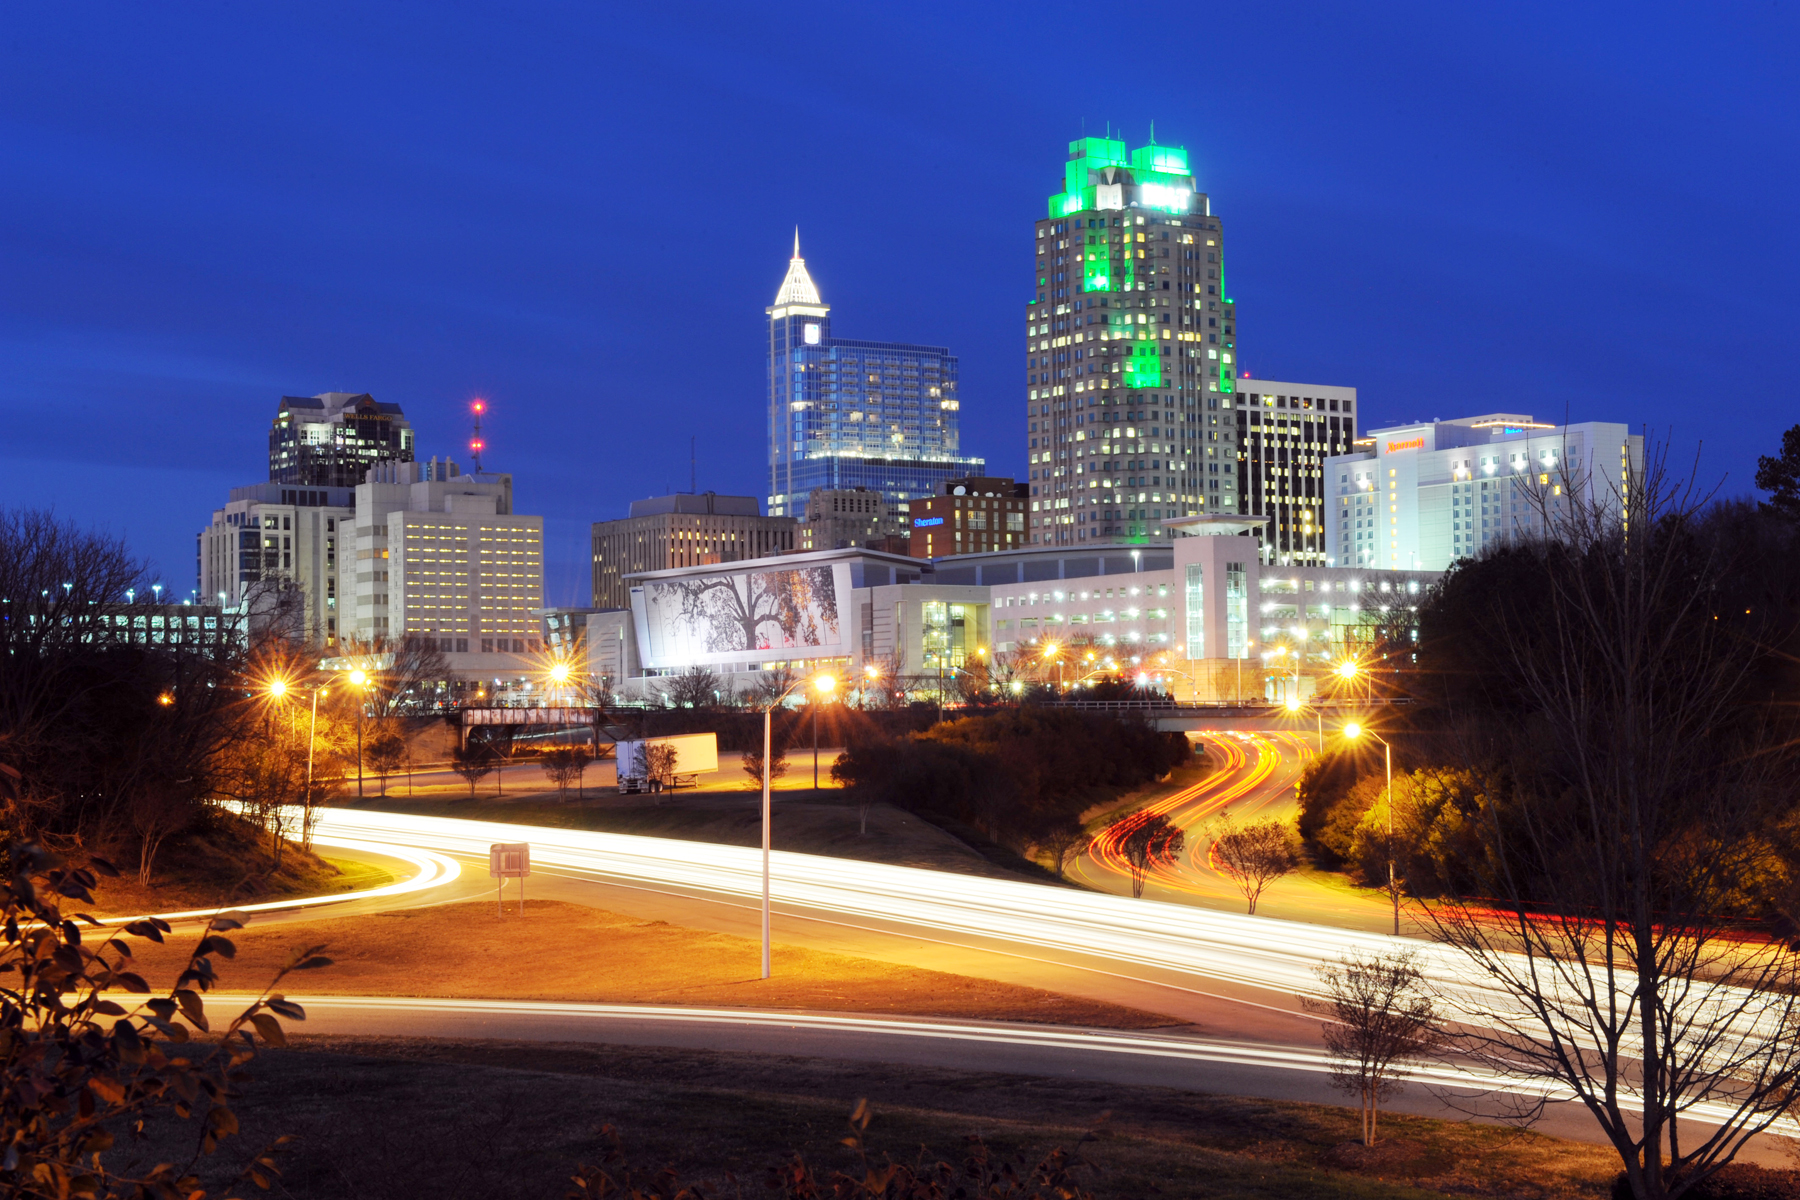 Beer, BBQ, & Bluegrass: (At Least) 7 Great Reasons to Visit Raleigh